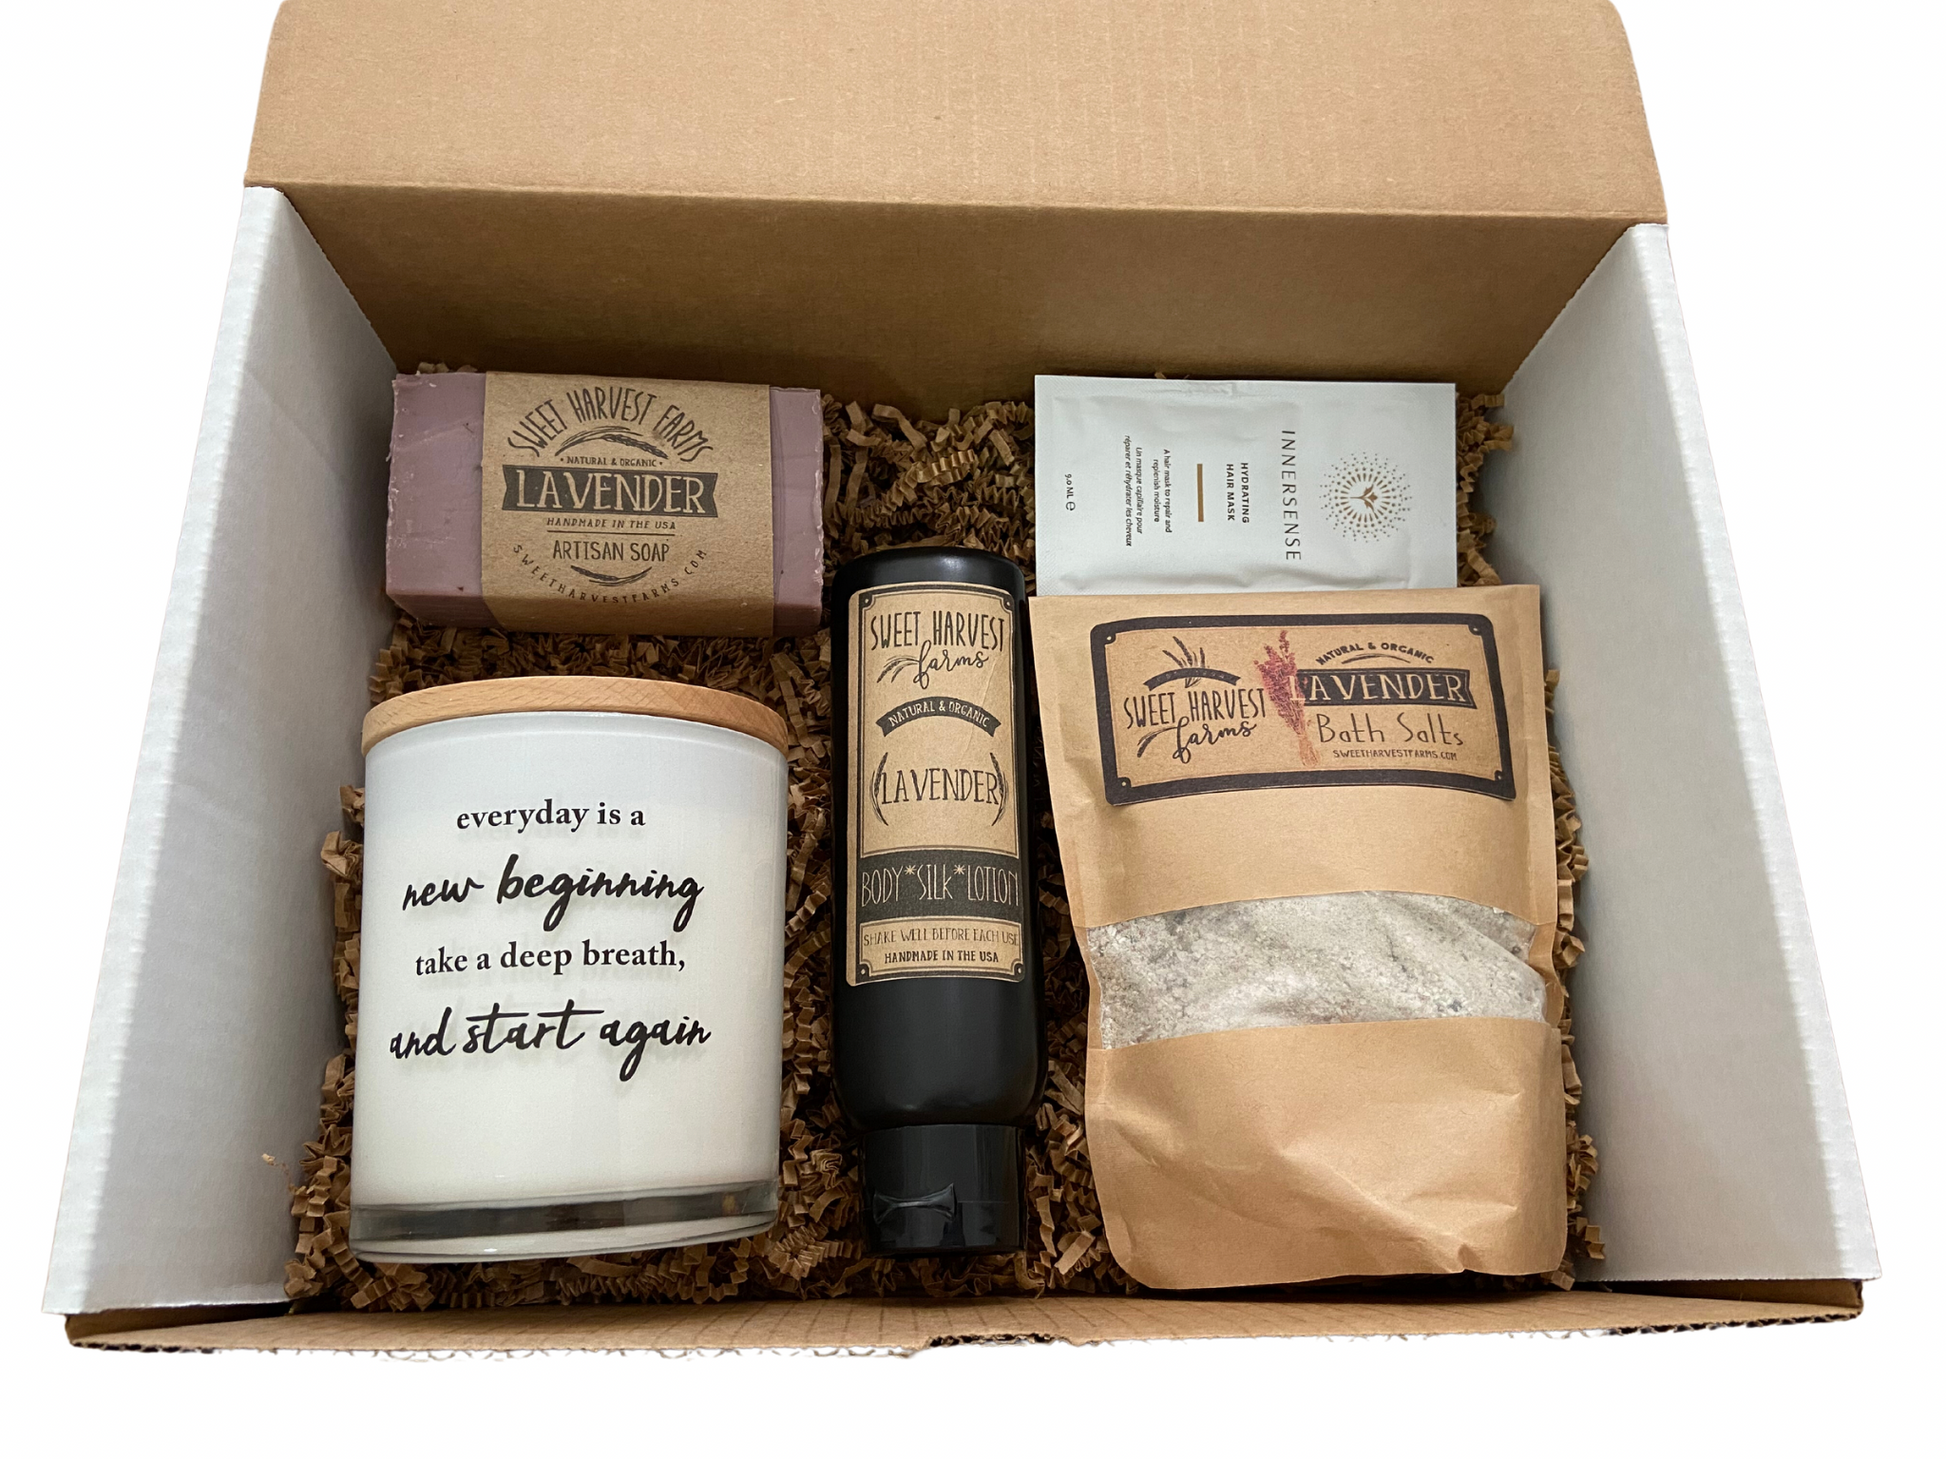 Our Relax & Reset box is an excellent way to destress and bask in some self-care right in the comfort of your own home. Bring a luxurious spa experience to your home with our curated boxes of all things pampering nurturing and self-loving organic handmade bath and body products